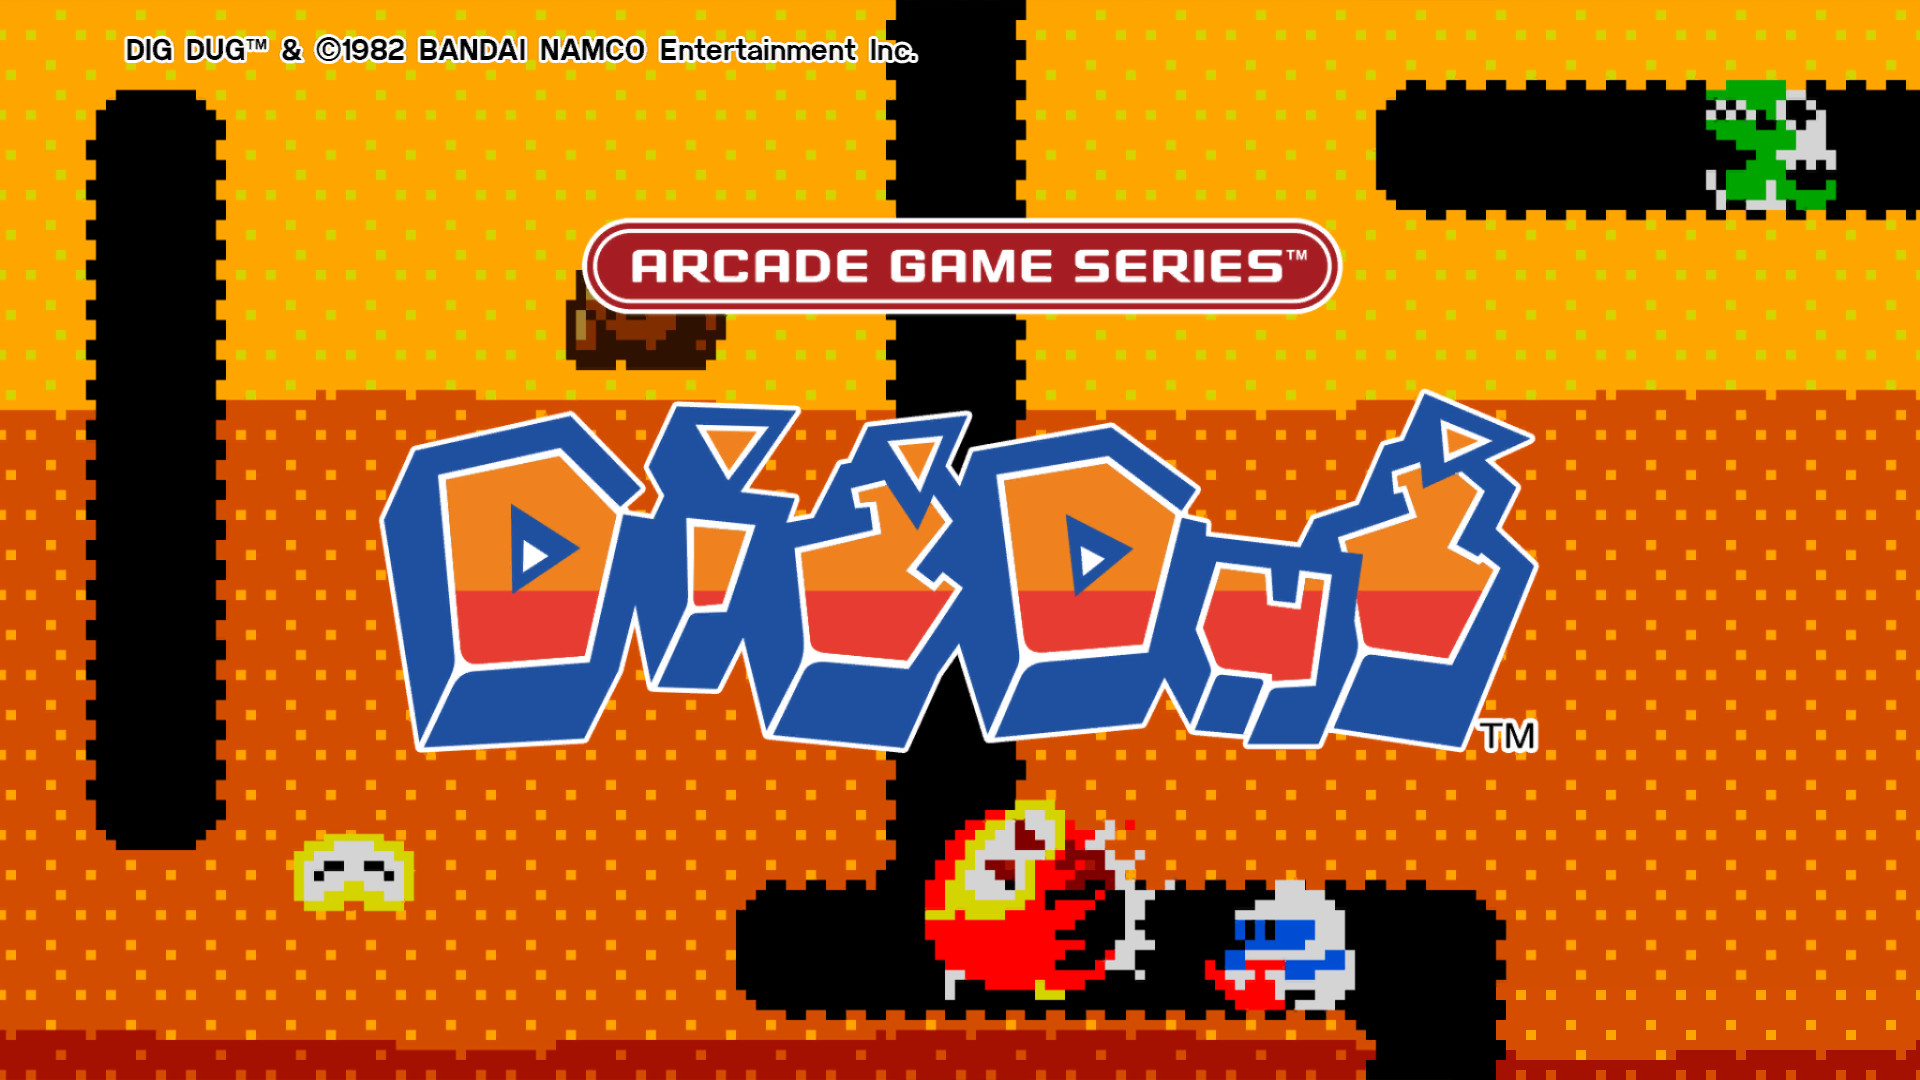 Dig dug how to play